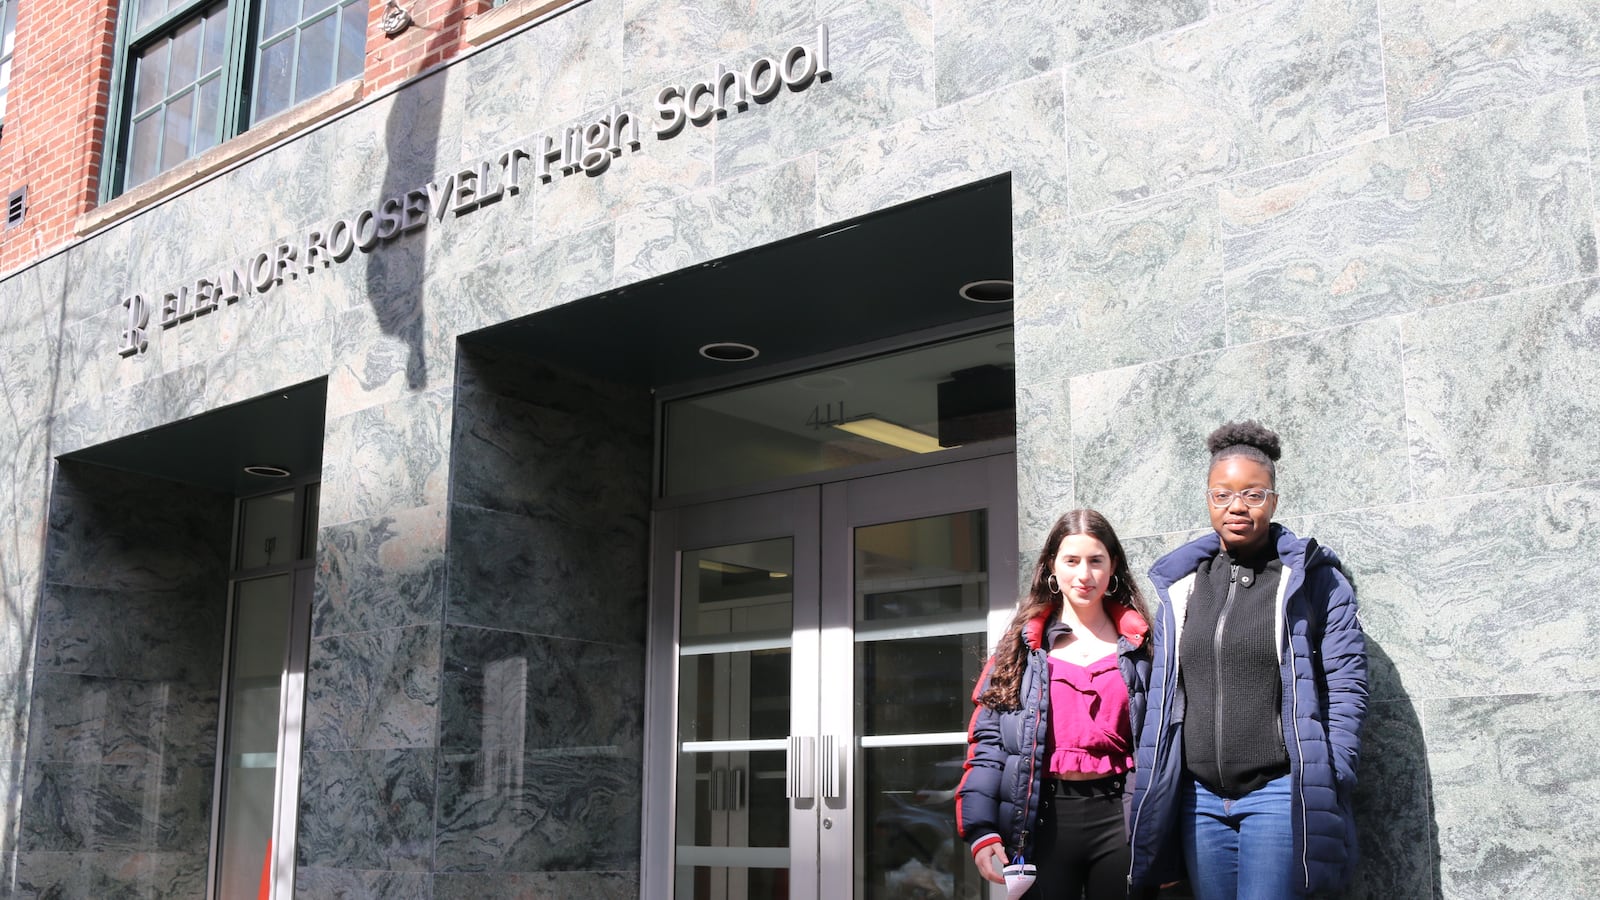 Students stand in front of Eleanor Roosevelt High School, which has one of the most rigorous academic screens for admission in the city.